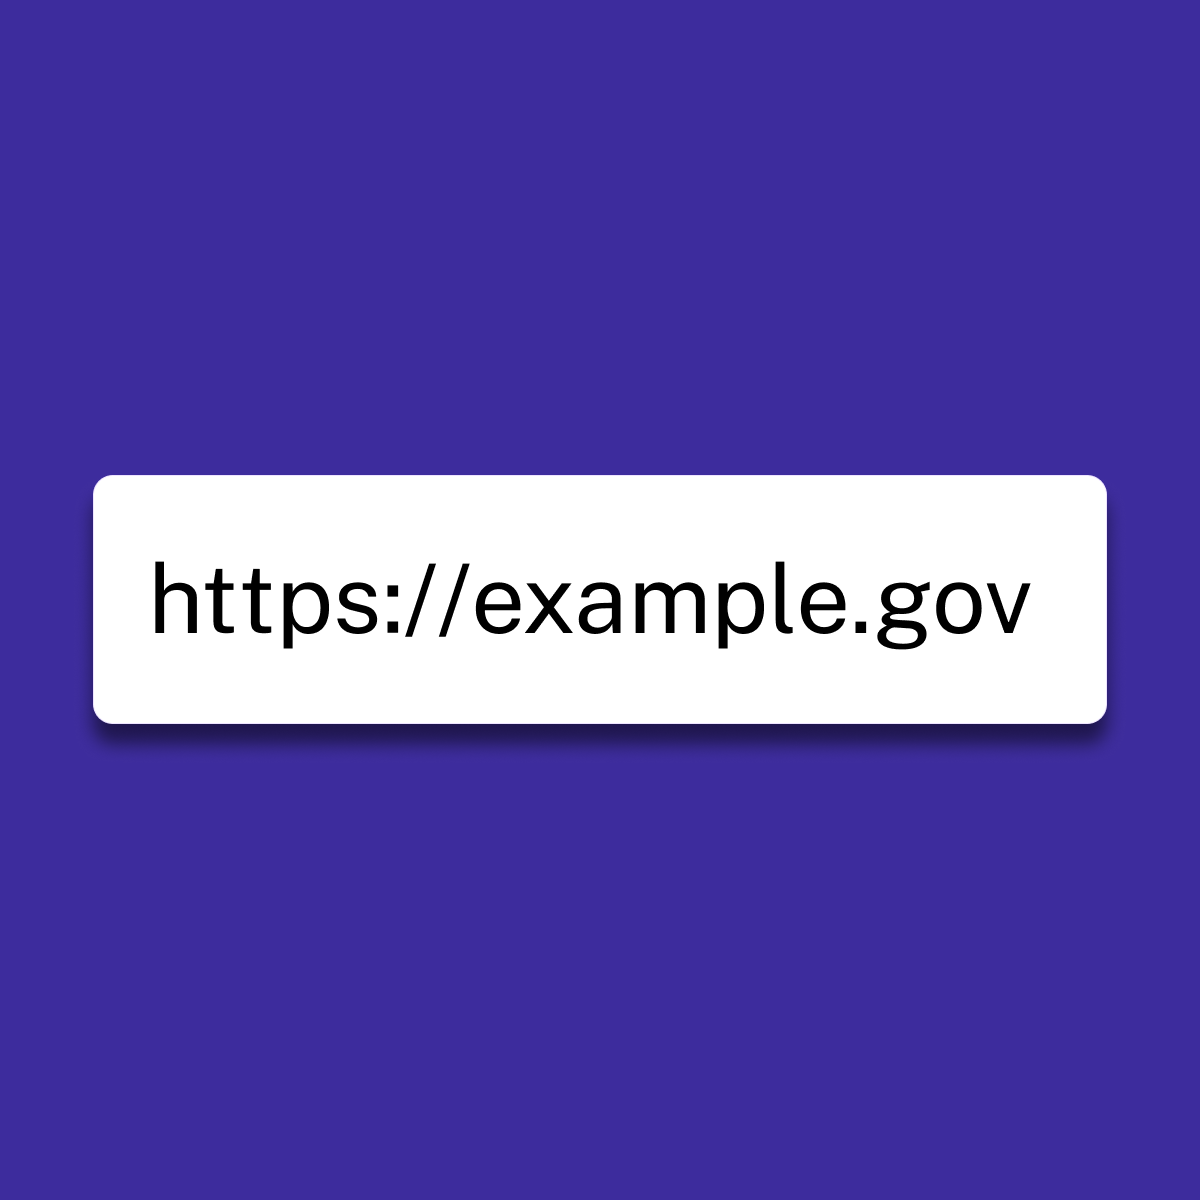 The text https://example.gov inside a rounded corner box